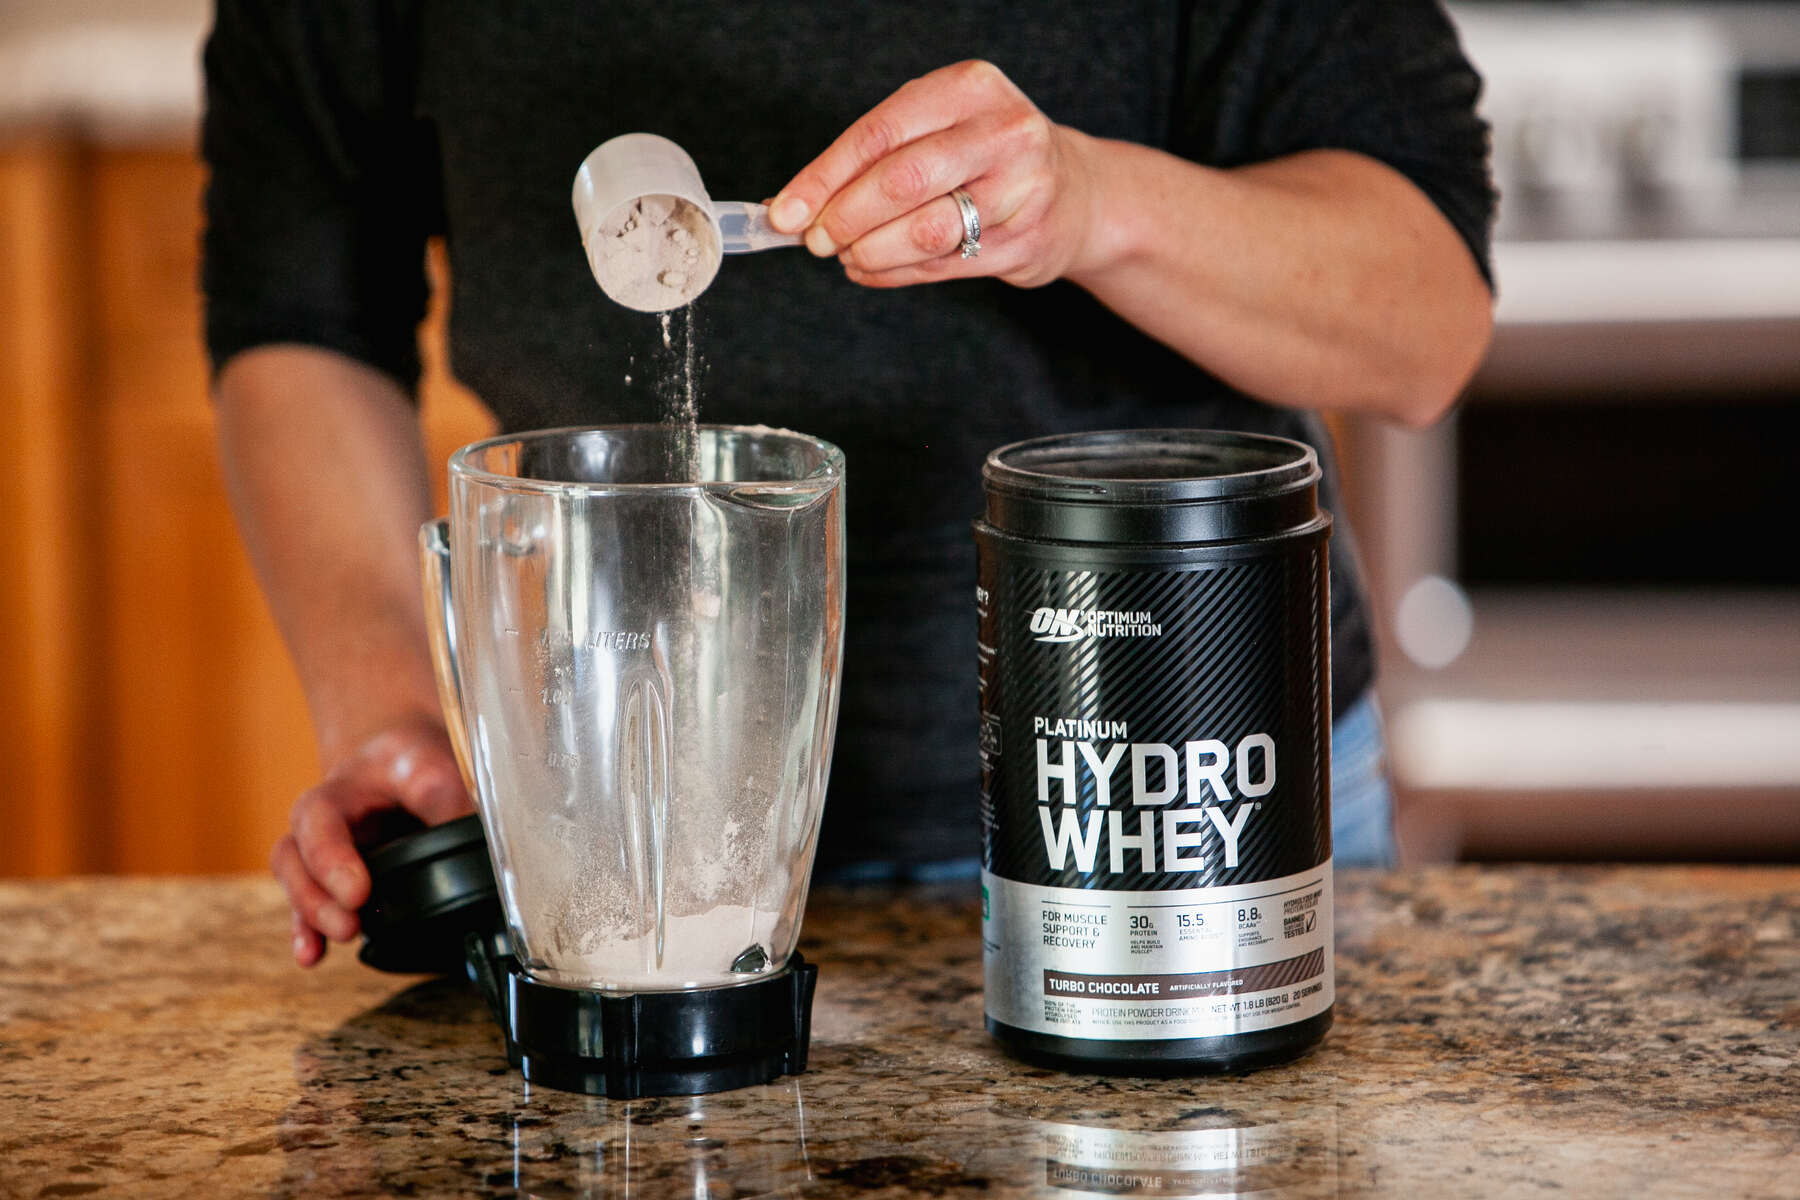 A person in a black top is pouring protein powder from a measuring scoop into a blender next to a black container of Optimum Nutrition Platinum Hydro Whey on a kitchen counter.